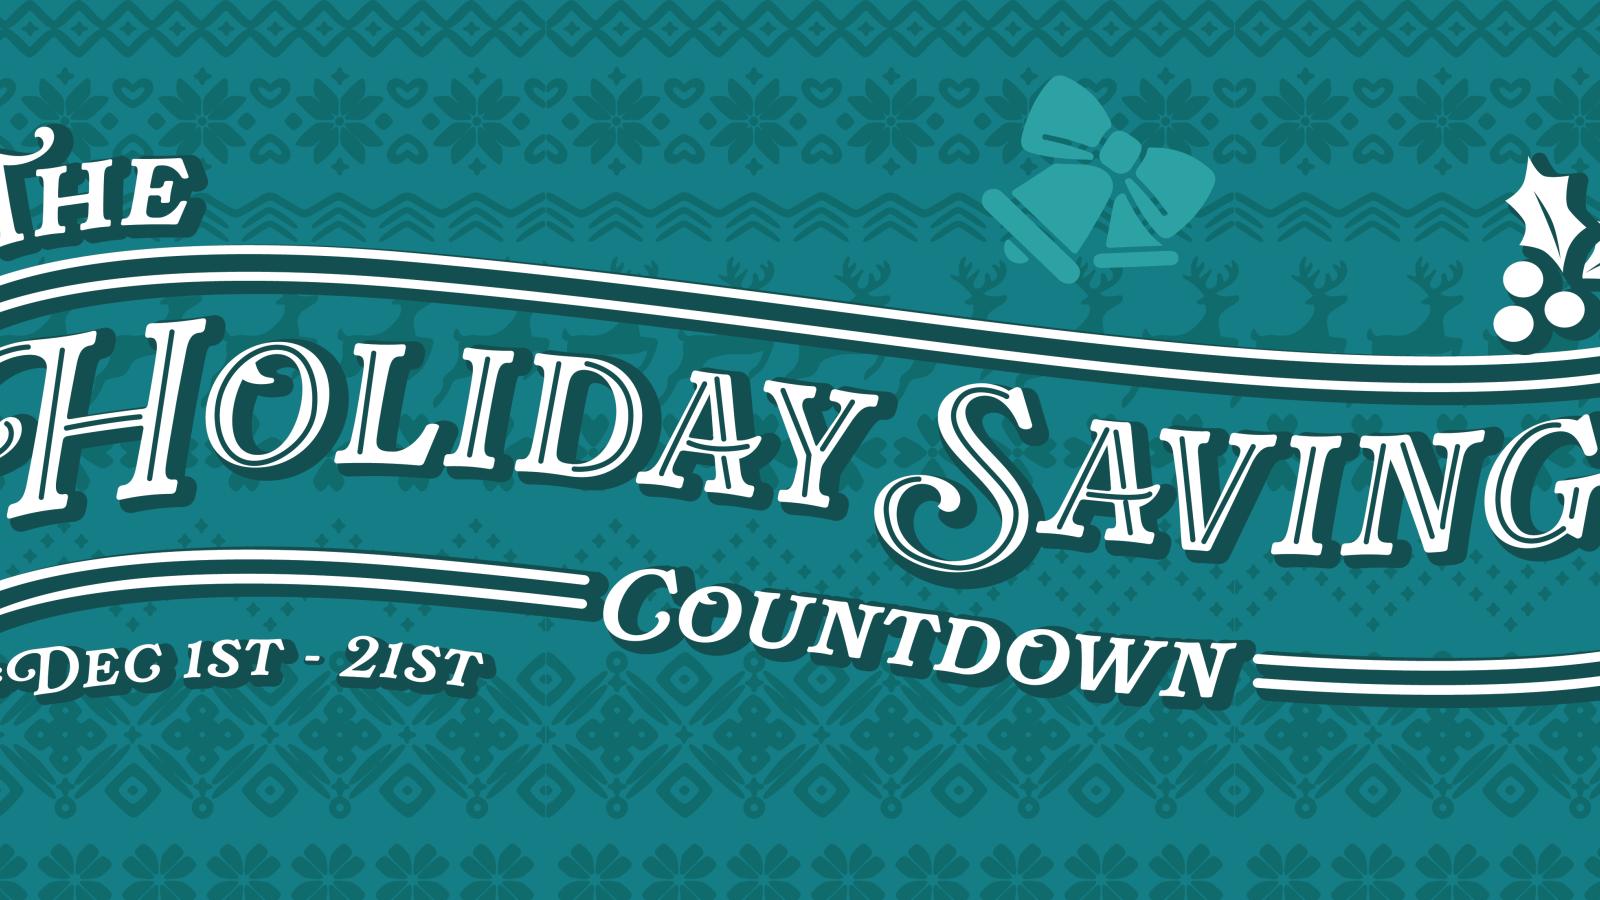 The Holiday Savings Countdown. December 1st - 21st.